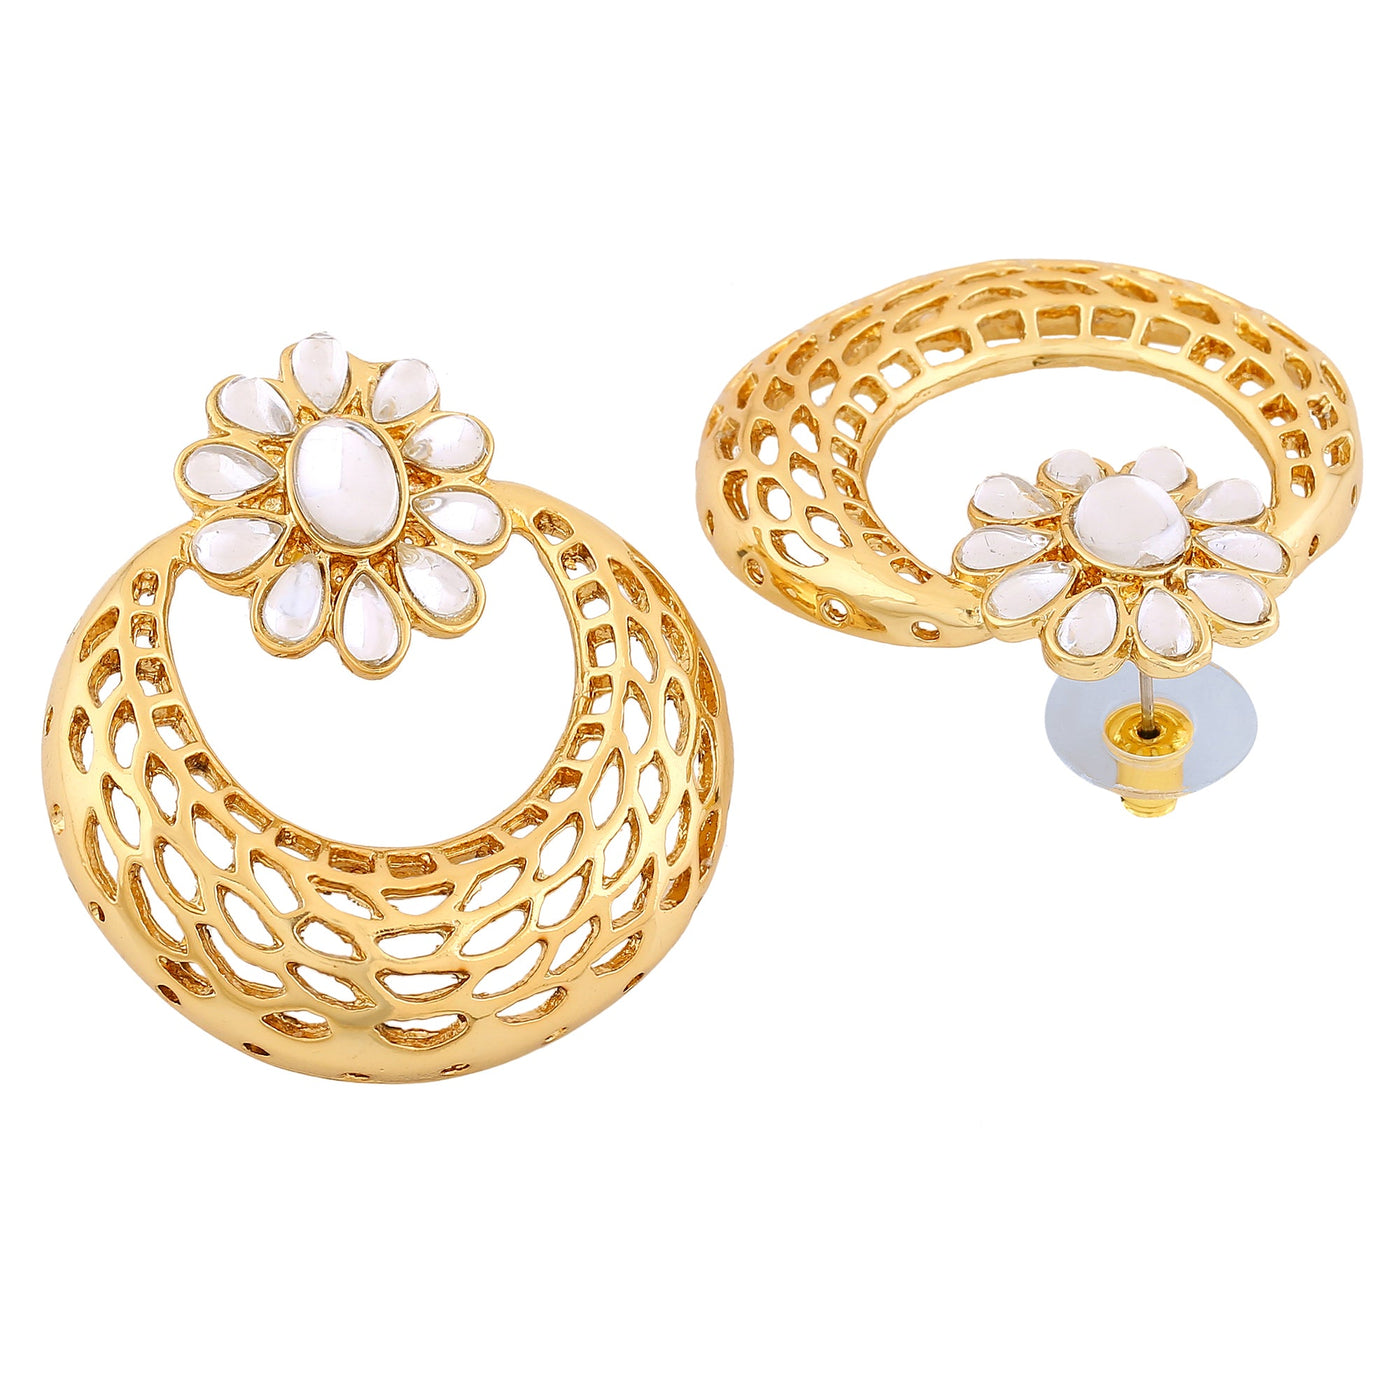 Estele Gold Plated Circular Shaped Earrings for Women